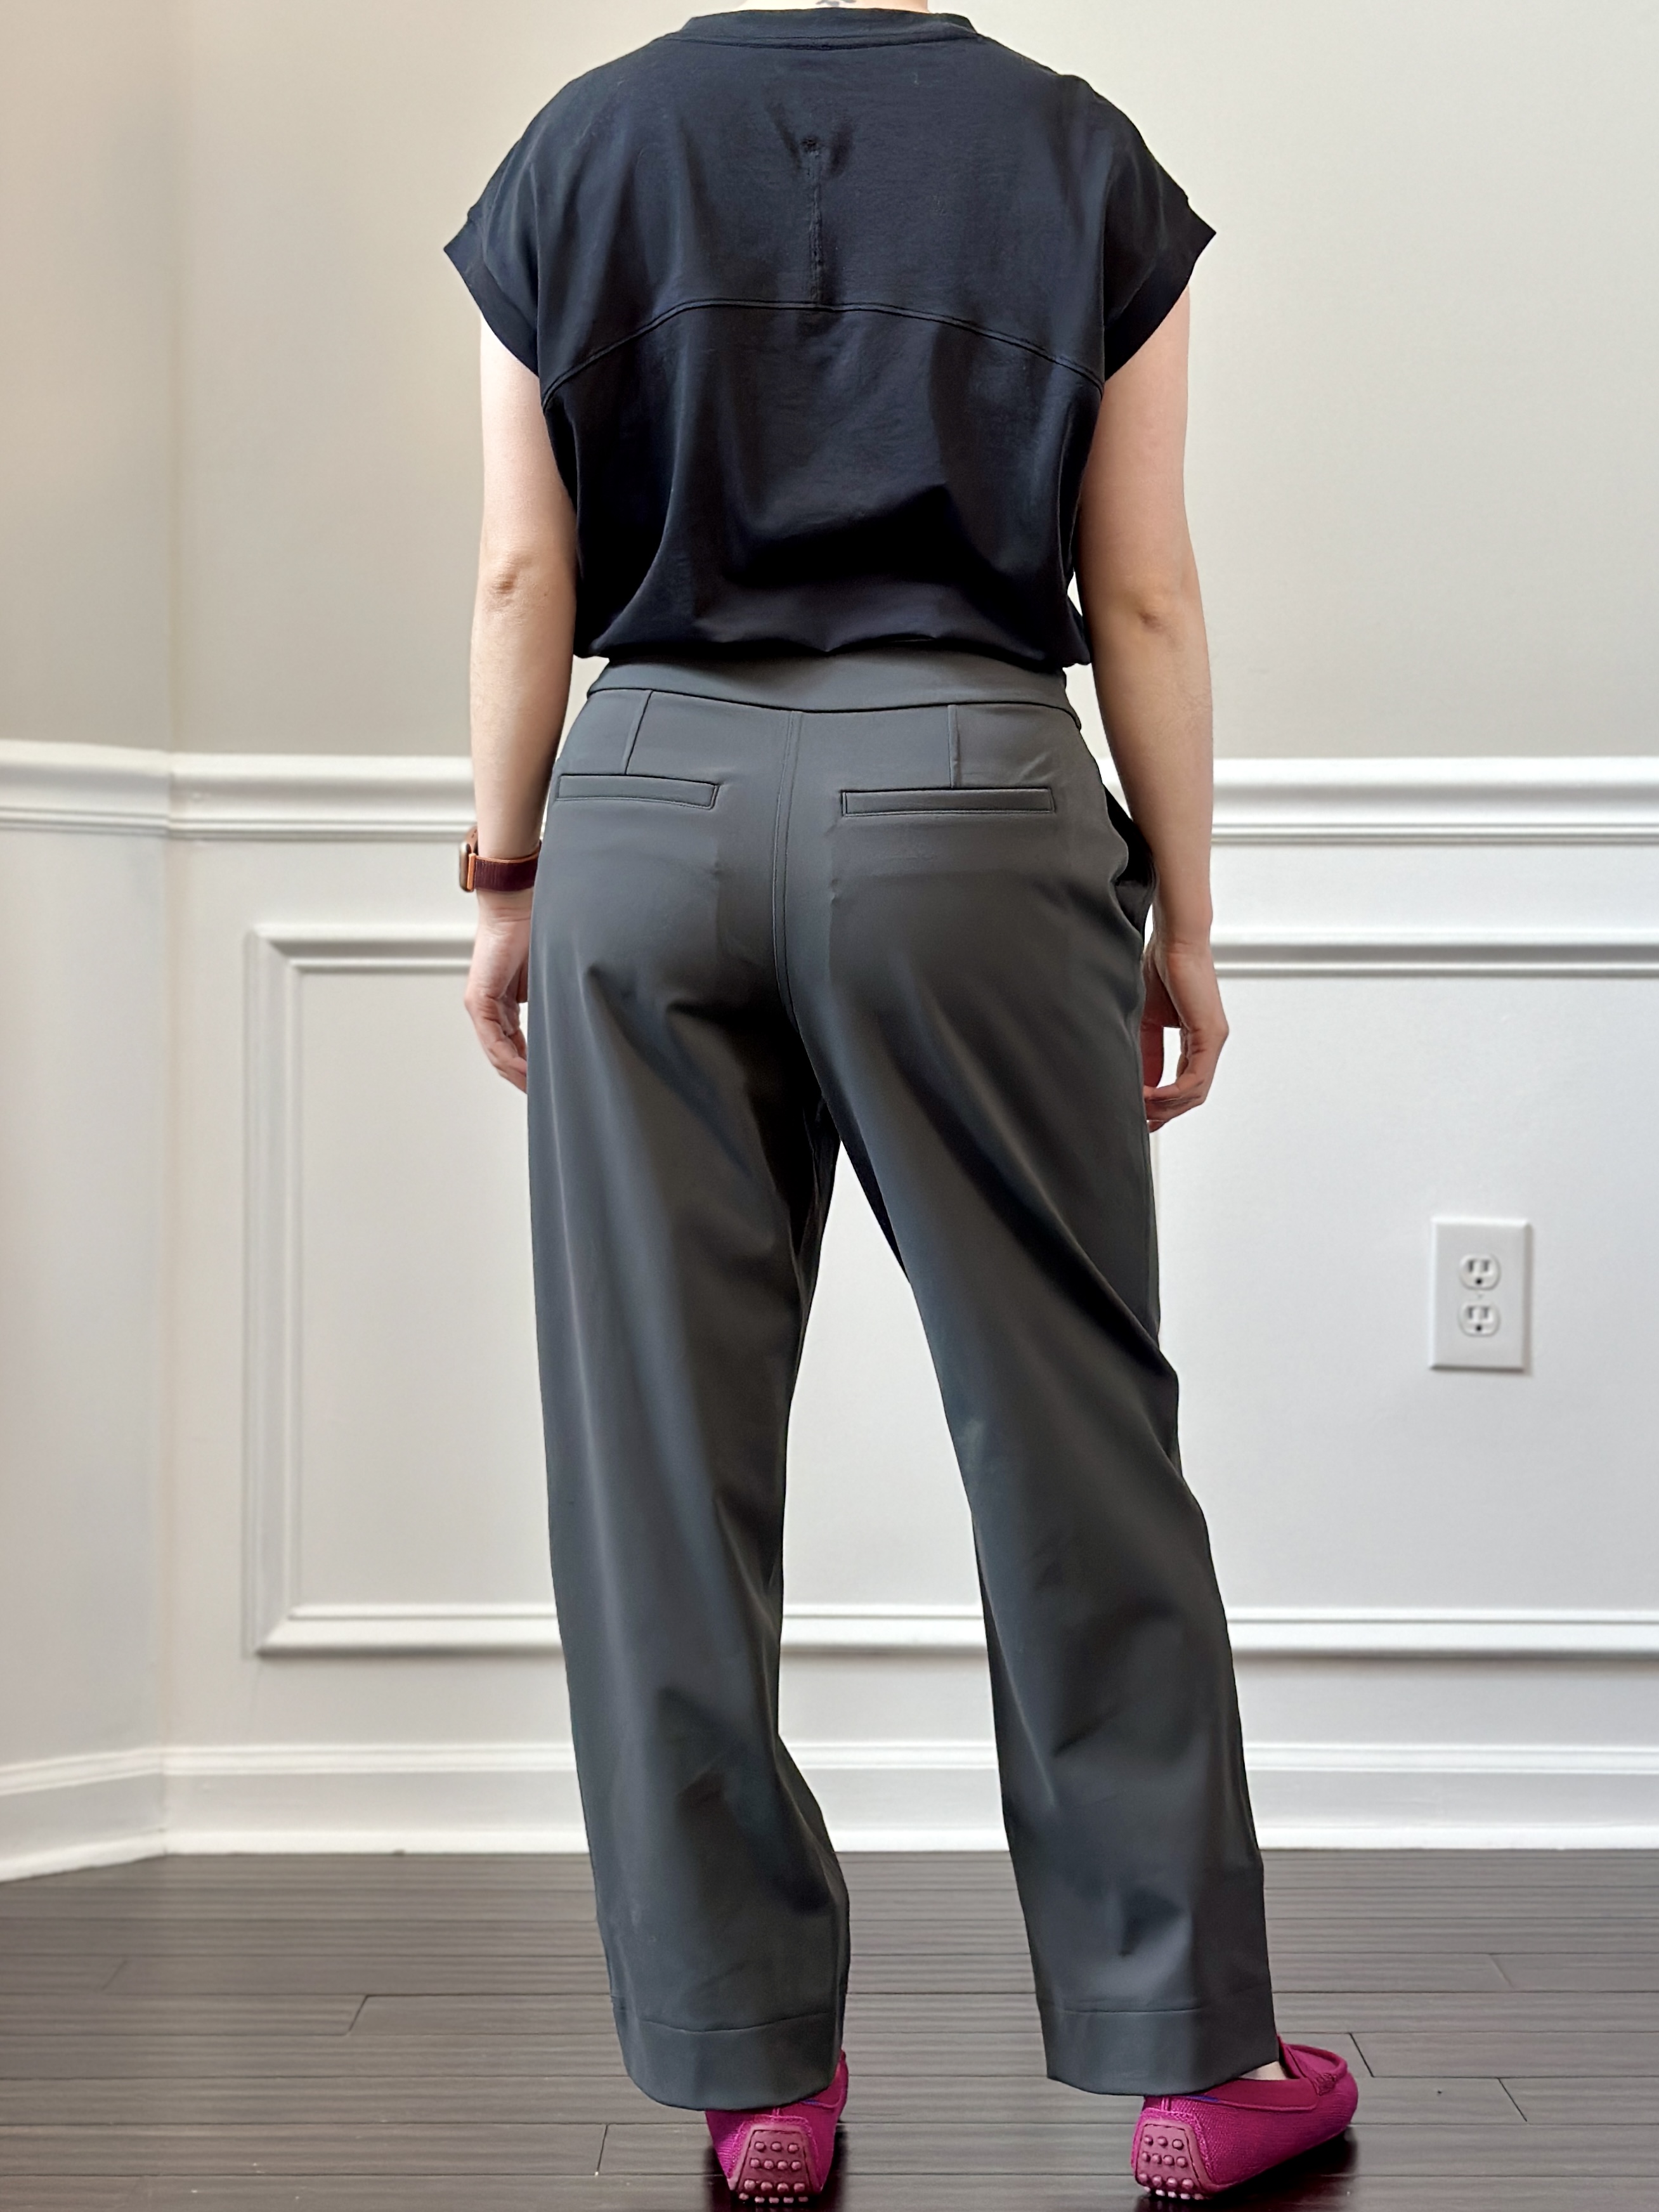 Fit Pics + Sizing Comparison - Keep Moving 7/8 pants, tidewater